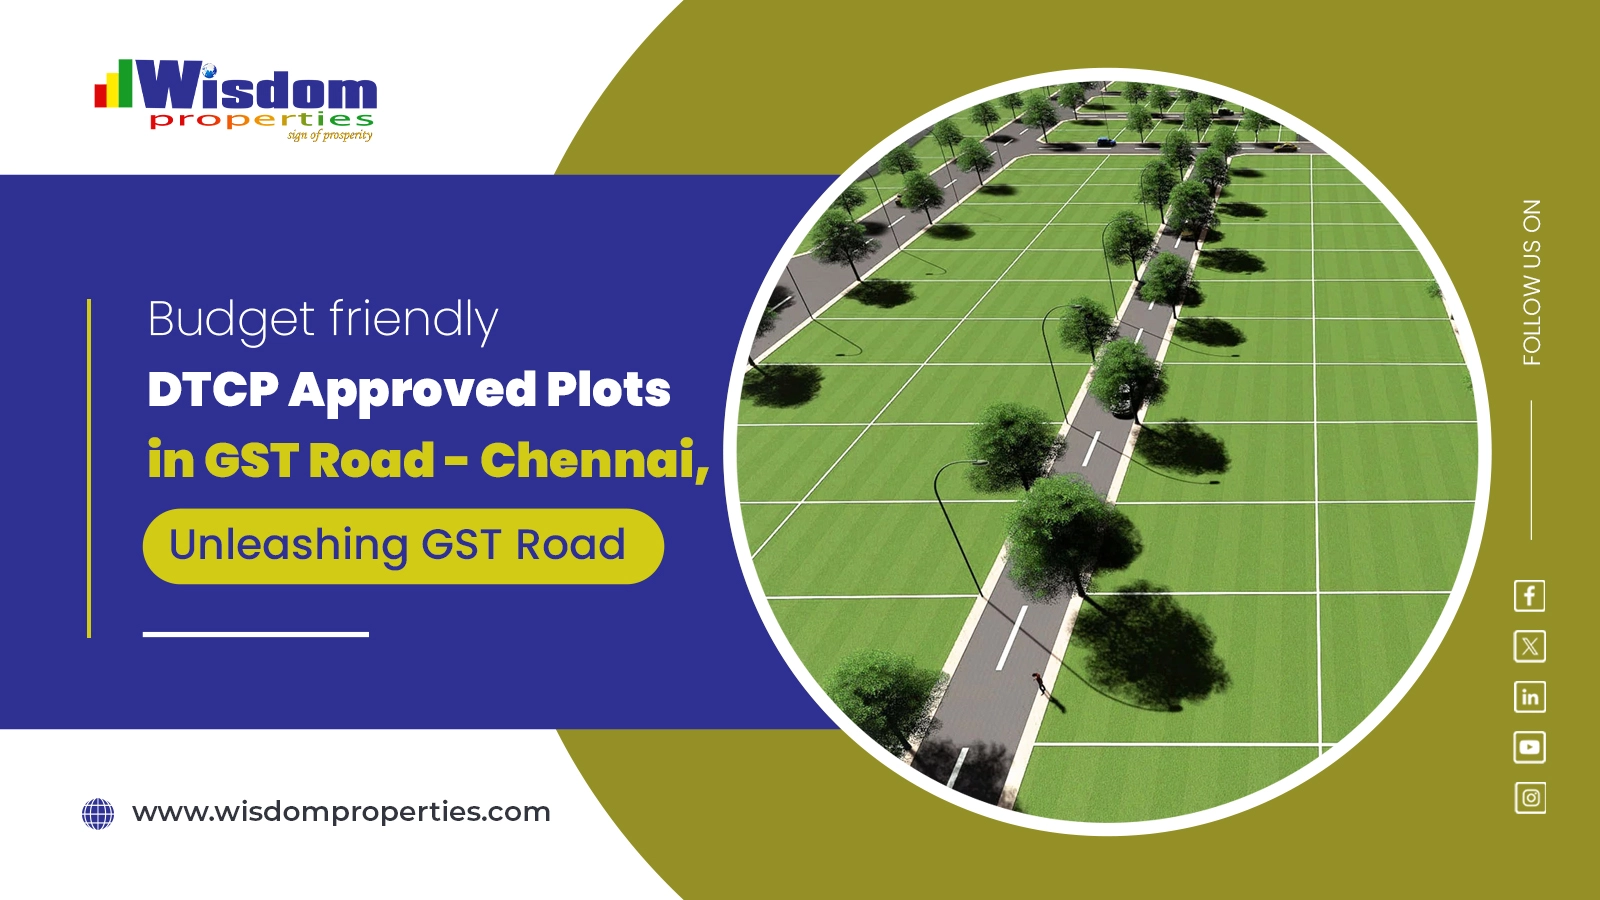 DTCP Approved Plots in GST Road - Chennai